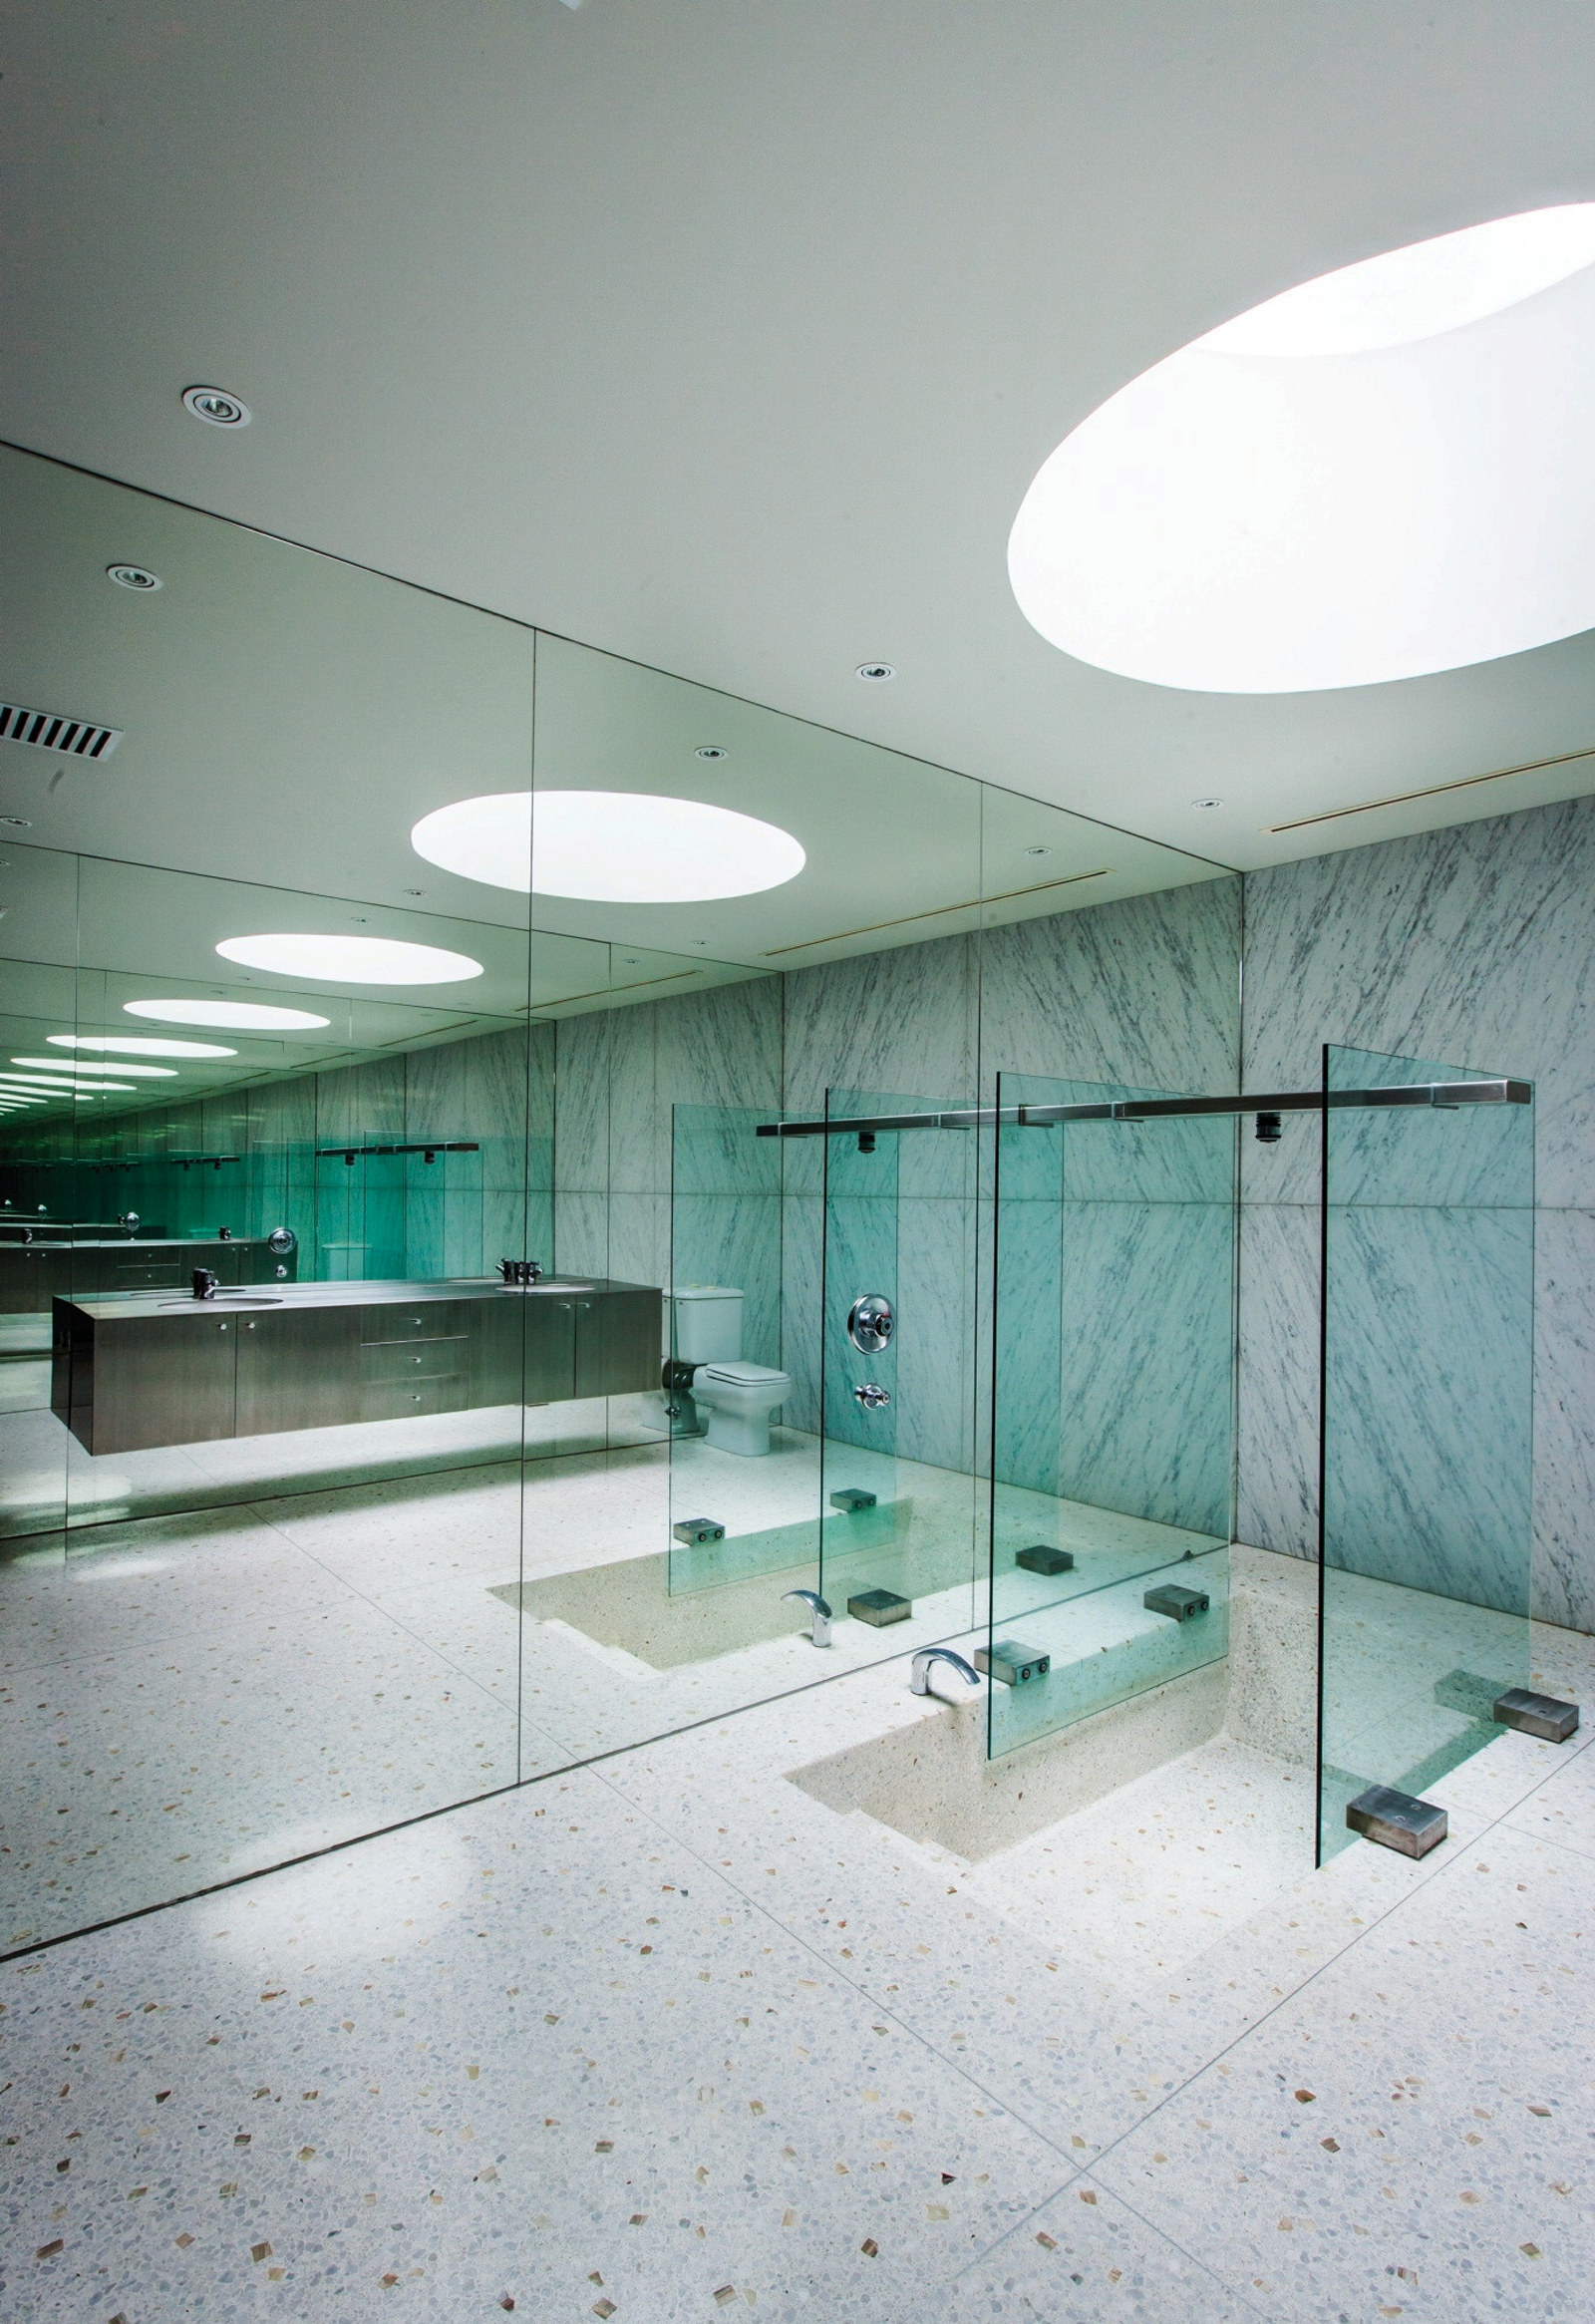 This is a photograph of a large ensuite bathroom with mirrors along one wall reflecting the marble floor and shower glass. There is a large round skylight above the shower.